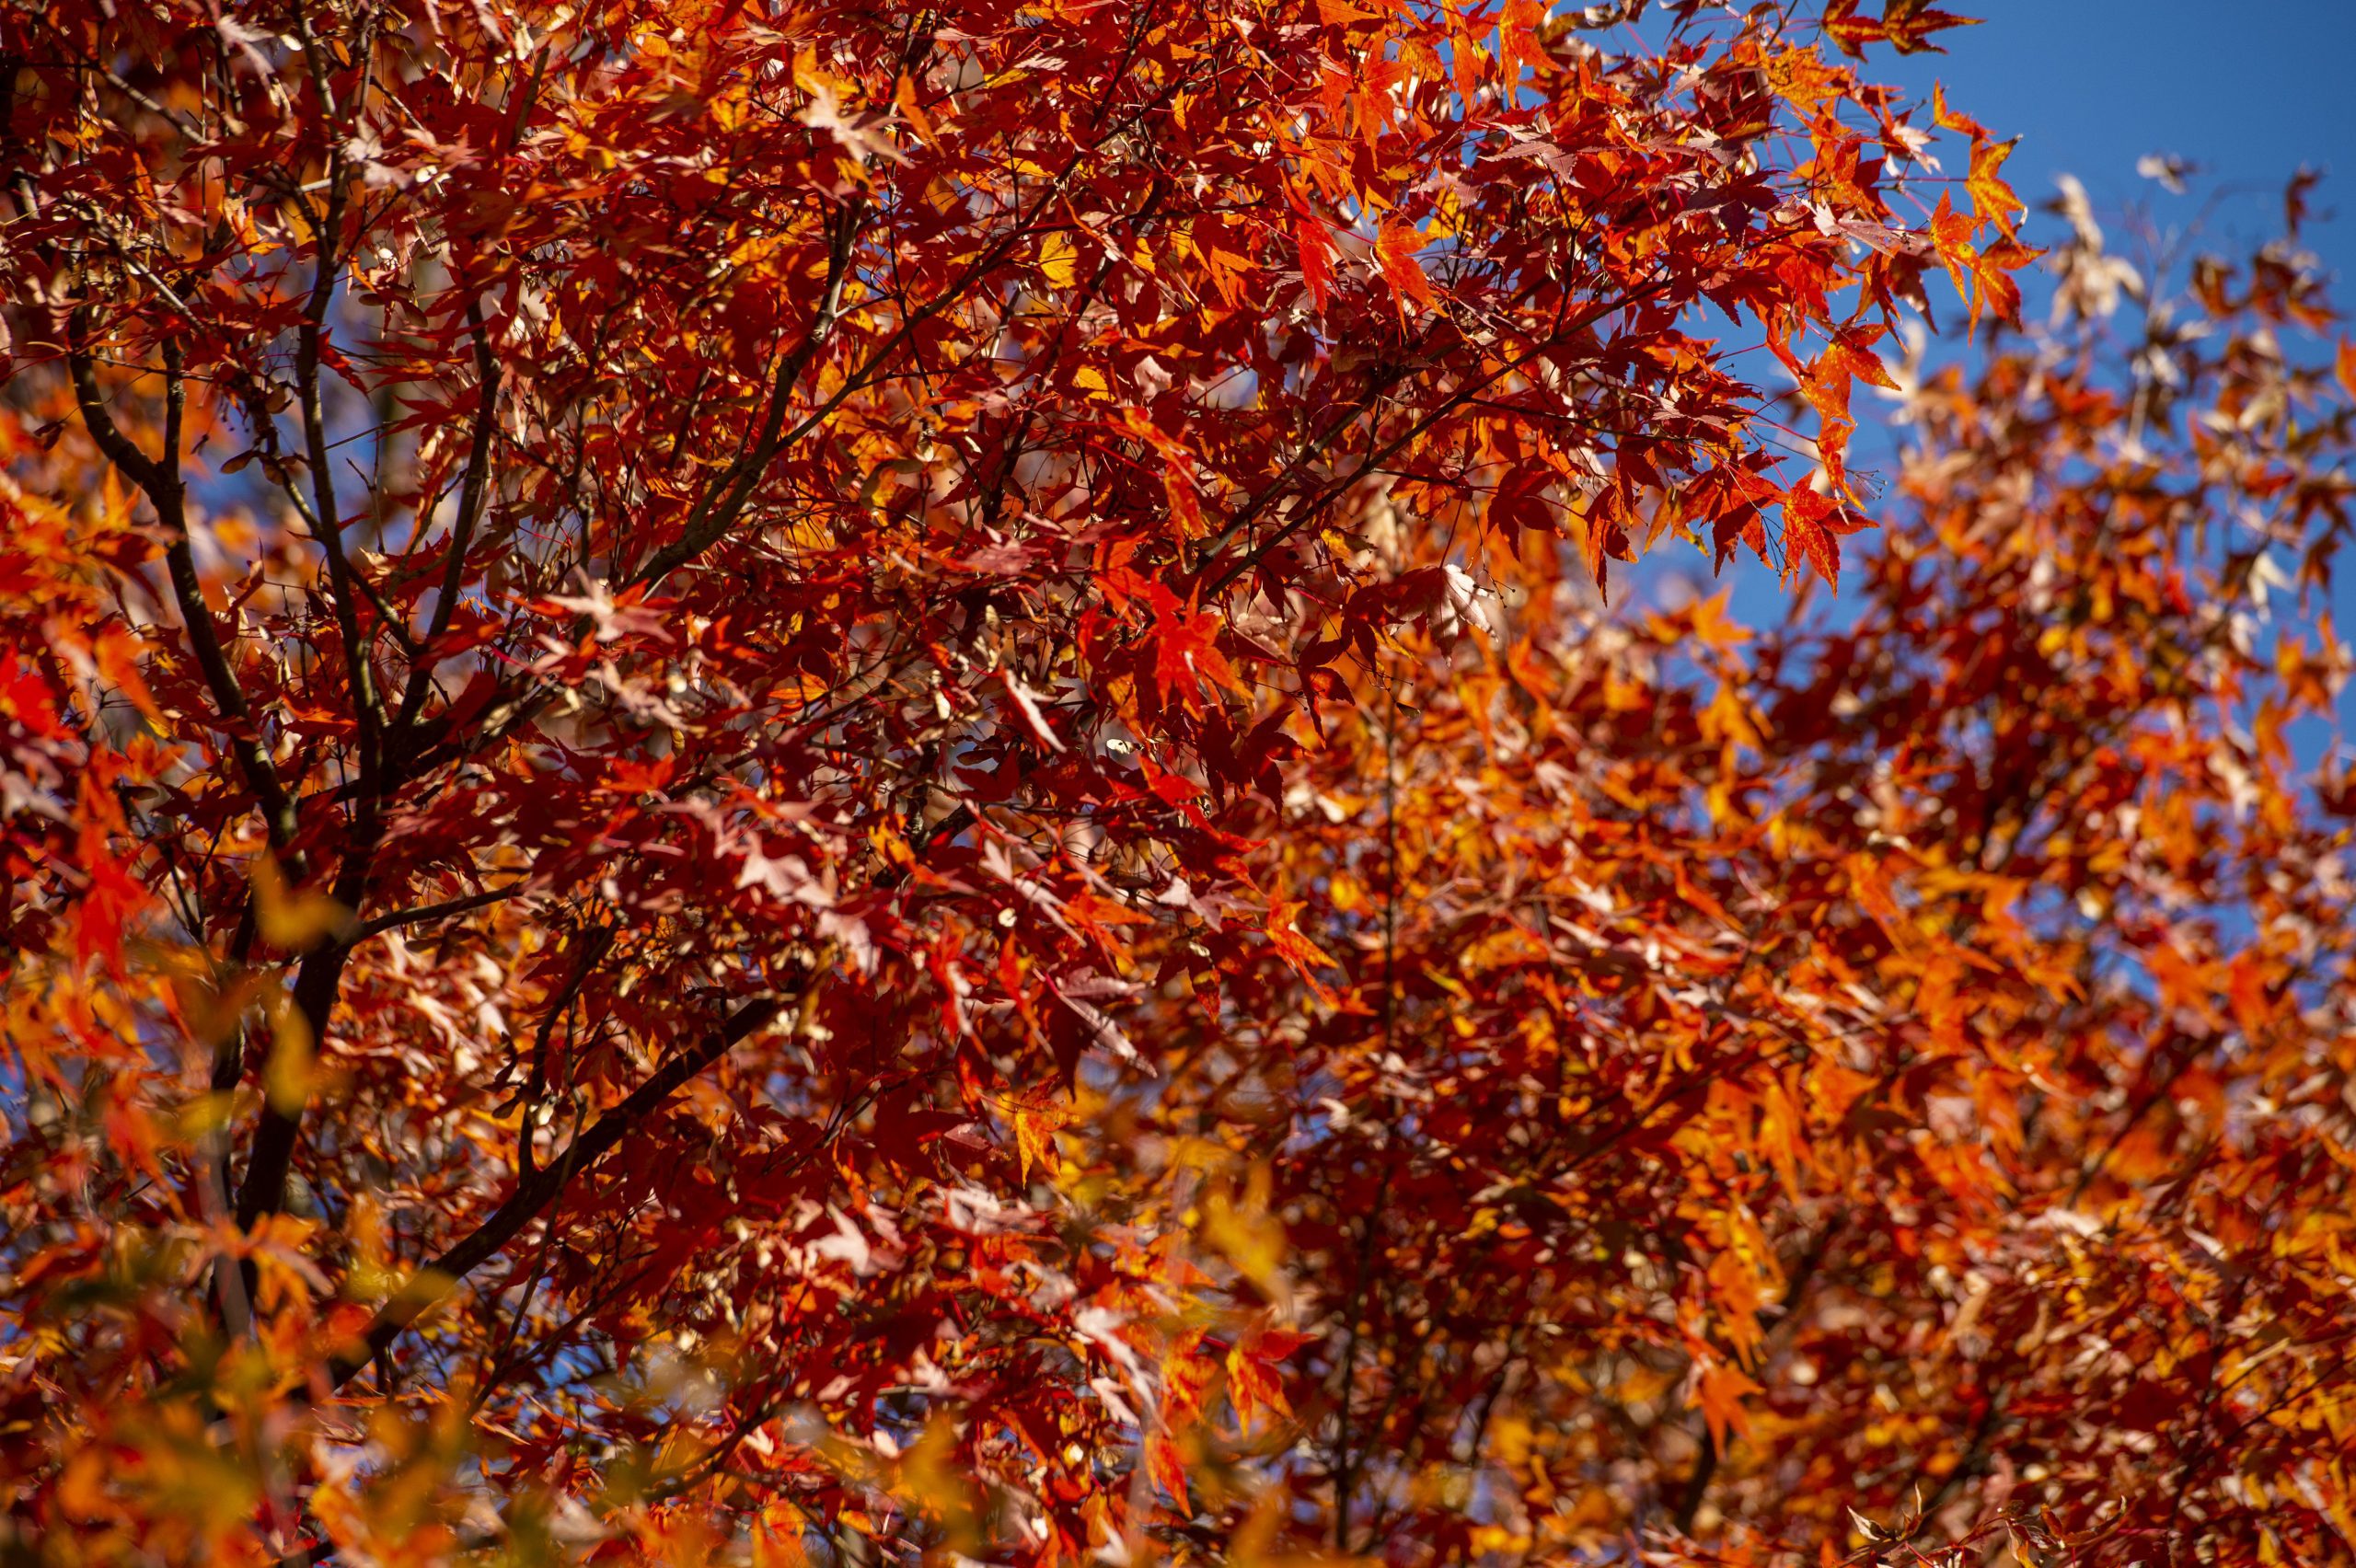 Red maple leaves against a blue sky